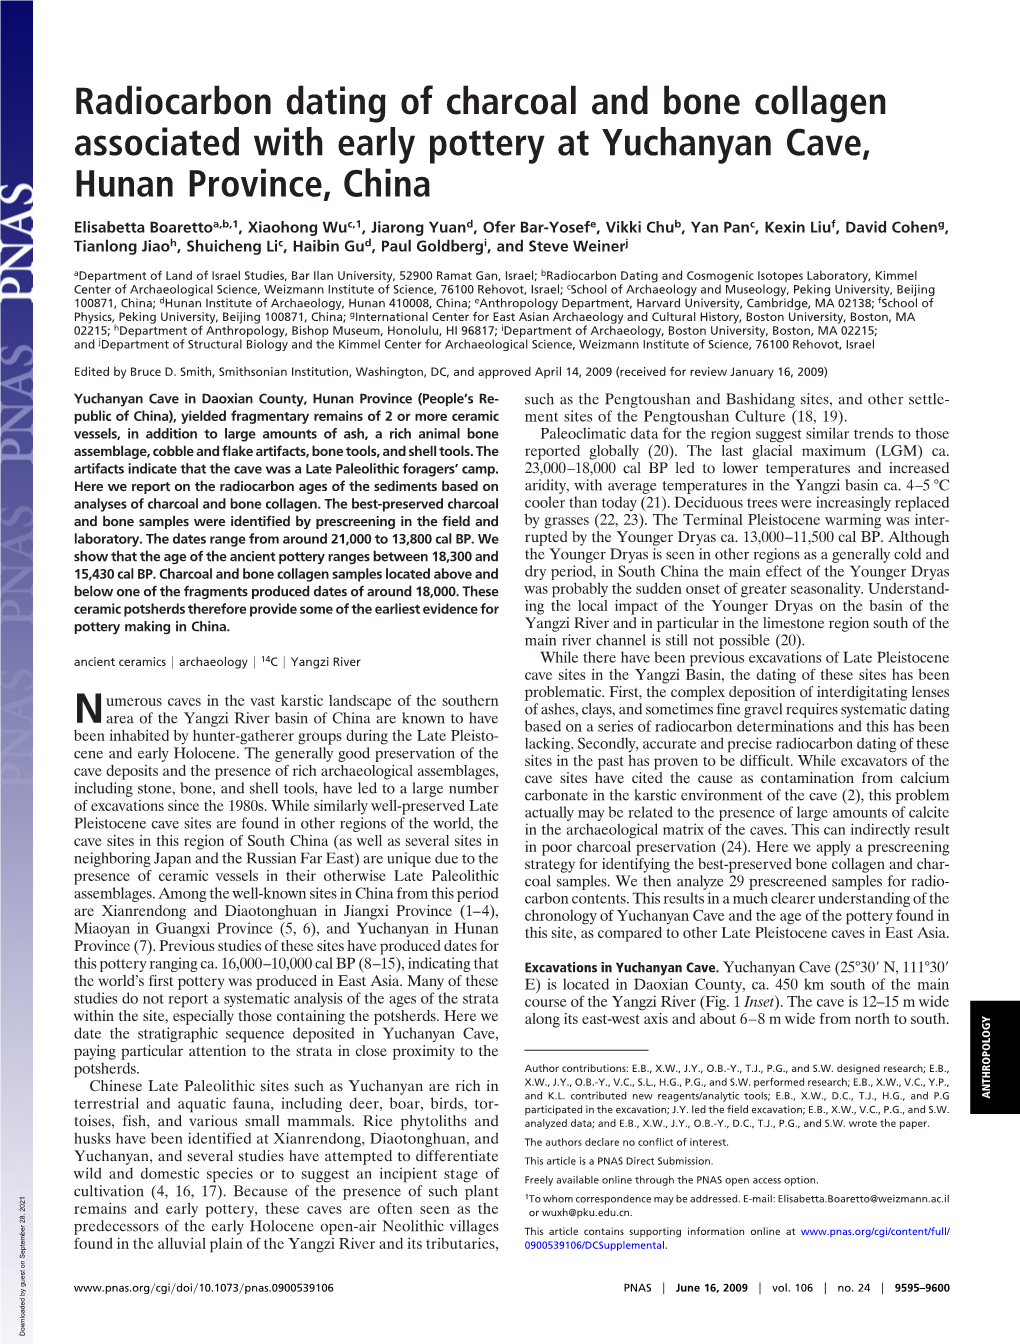 Radiocarbon Dating of Charcoal and Bone Collagen Associated with Early Pottery at Yuchanyan Cave, Hunan Province, China